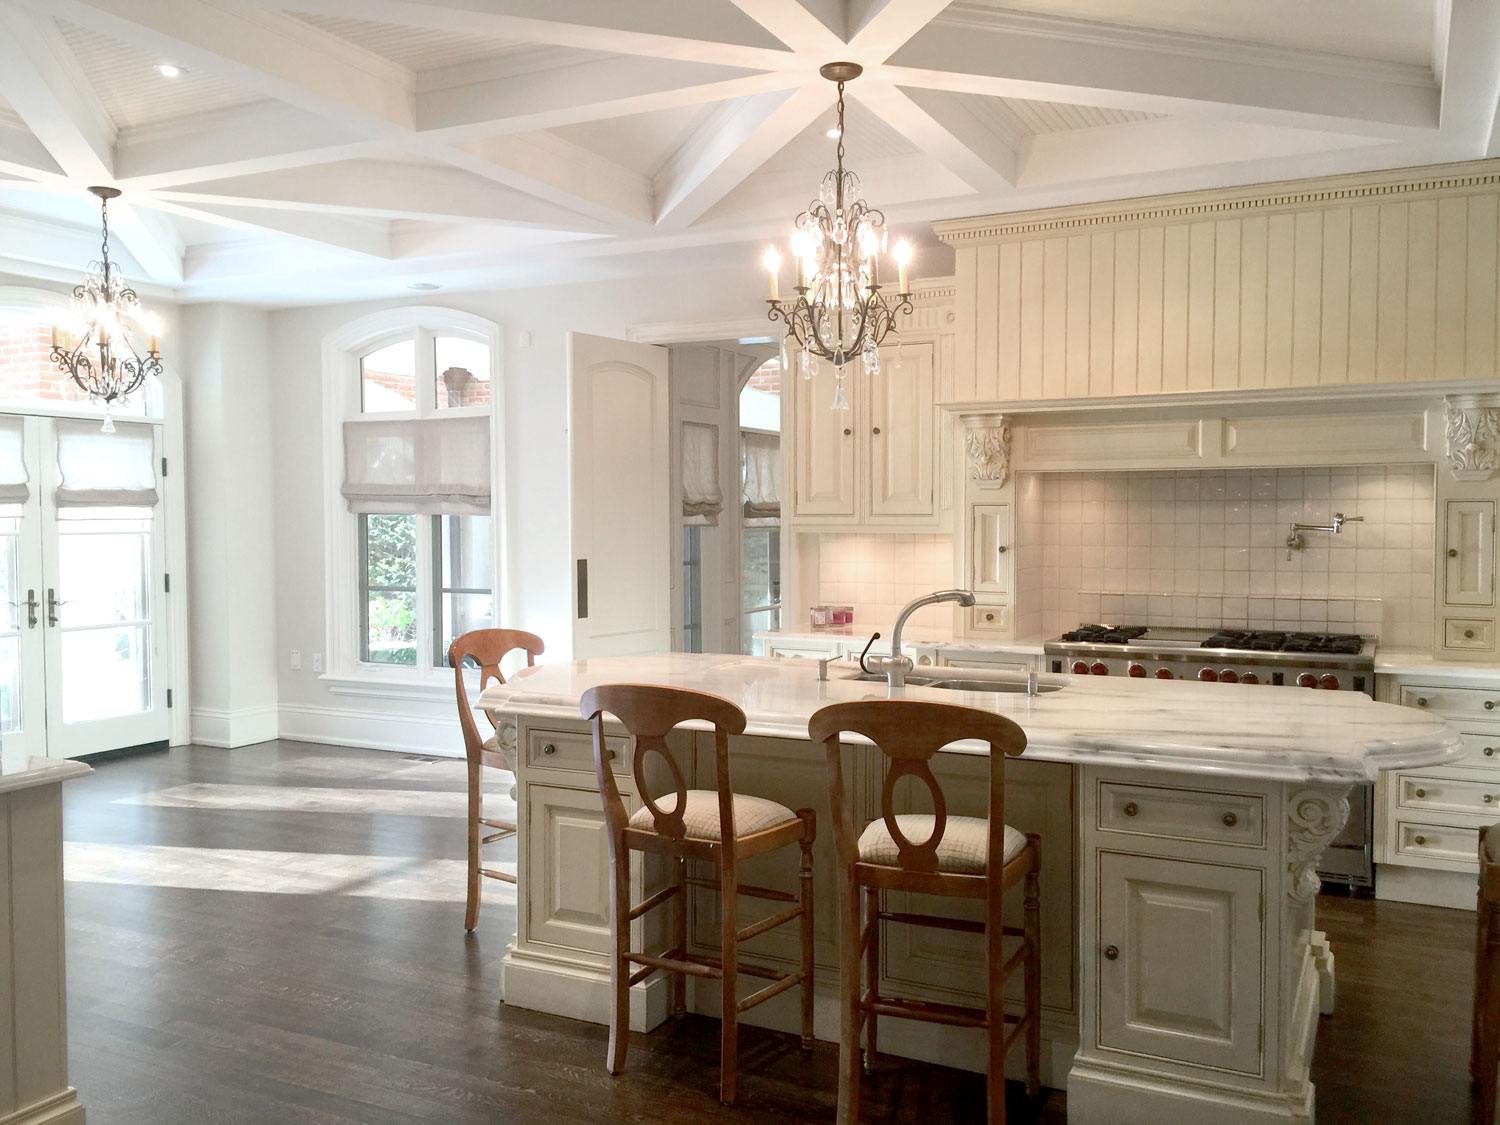 white kitchen with island and chandeliers